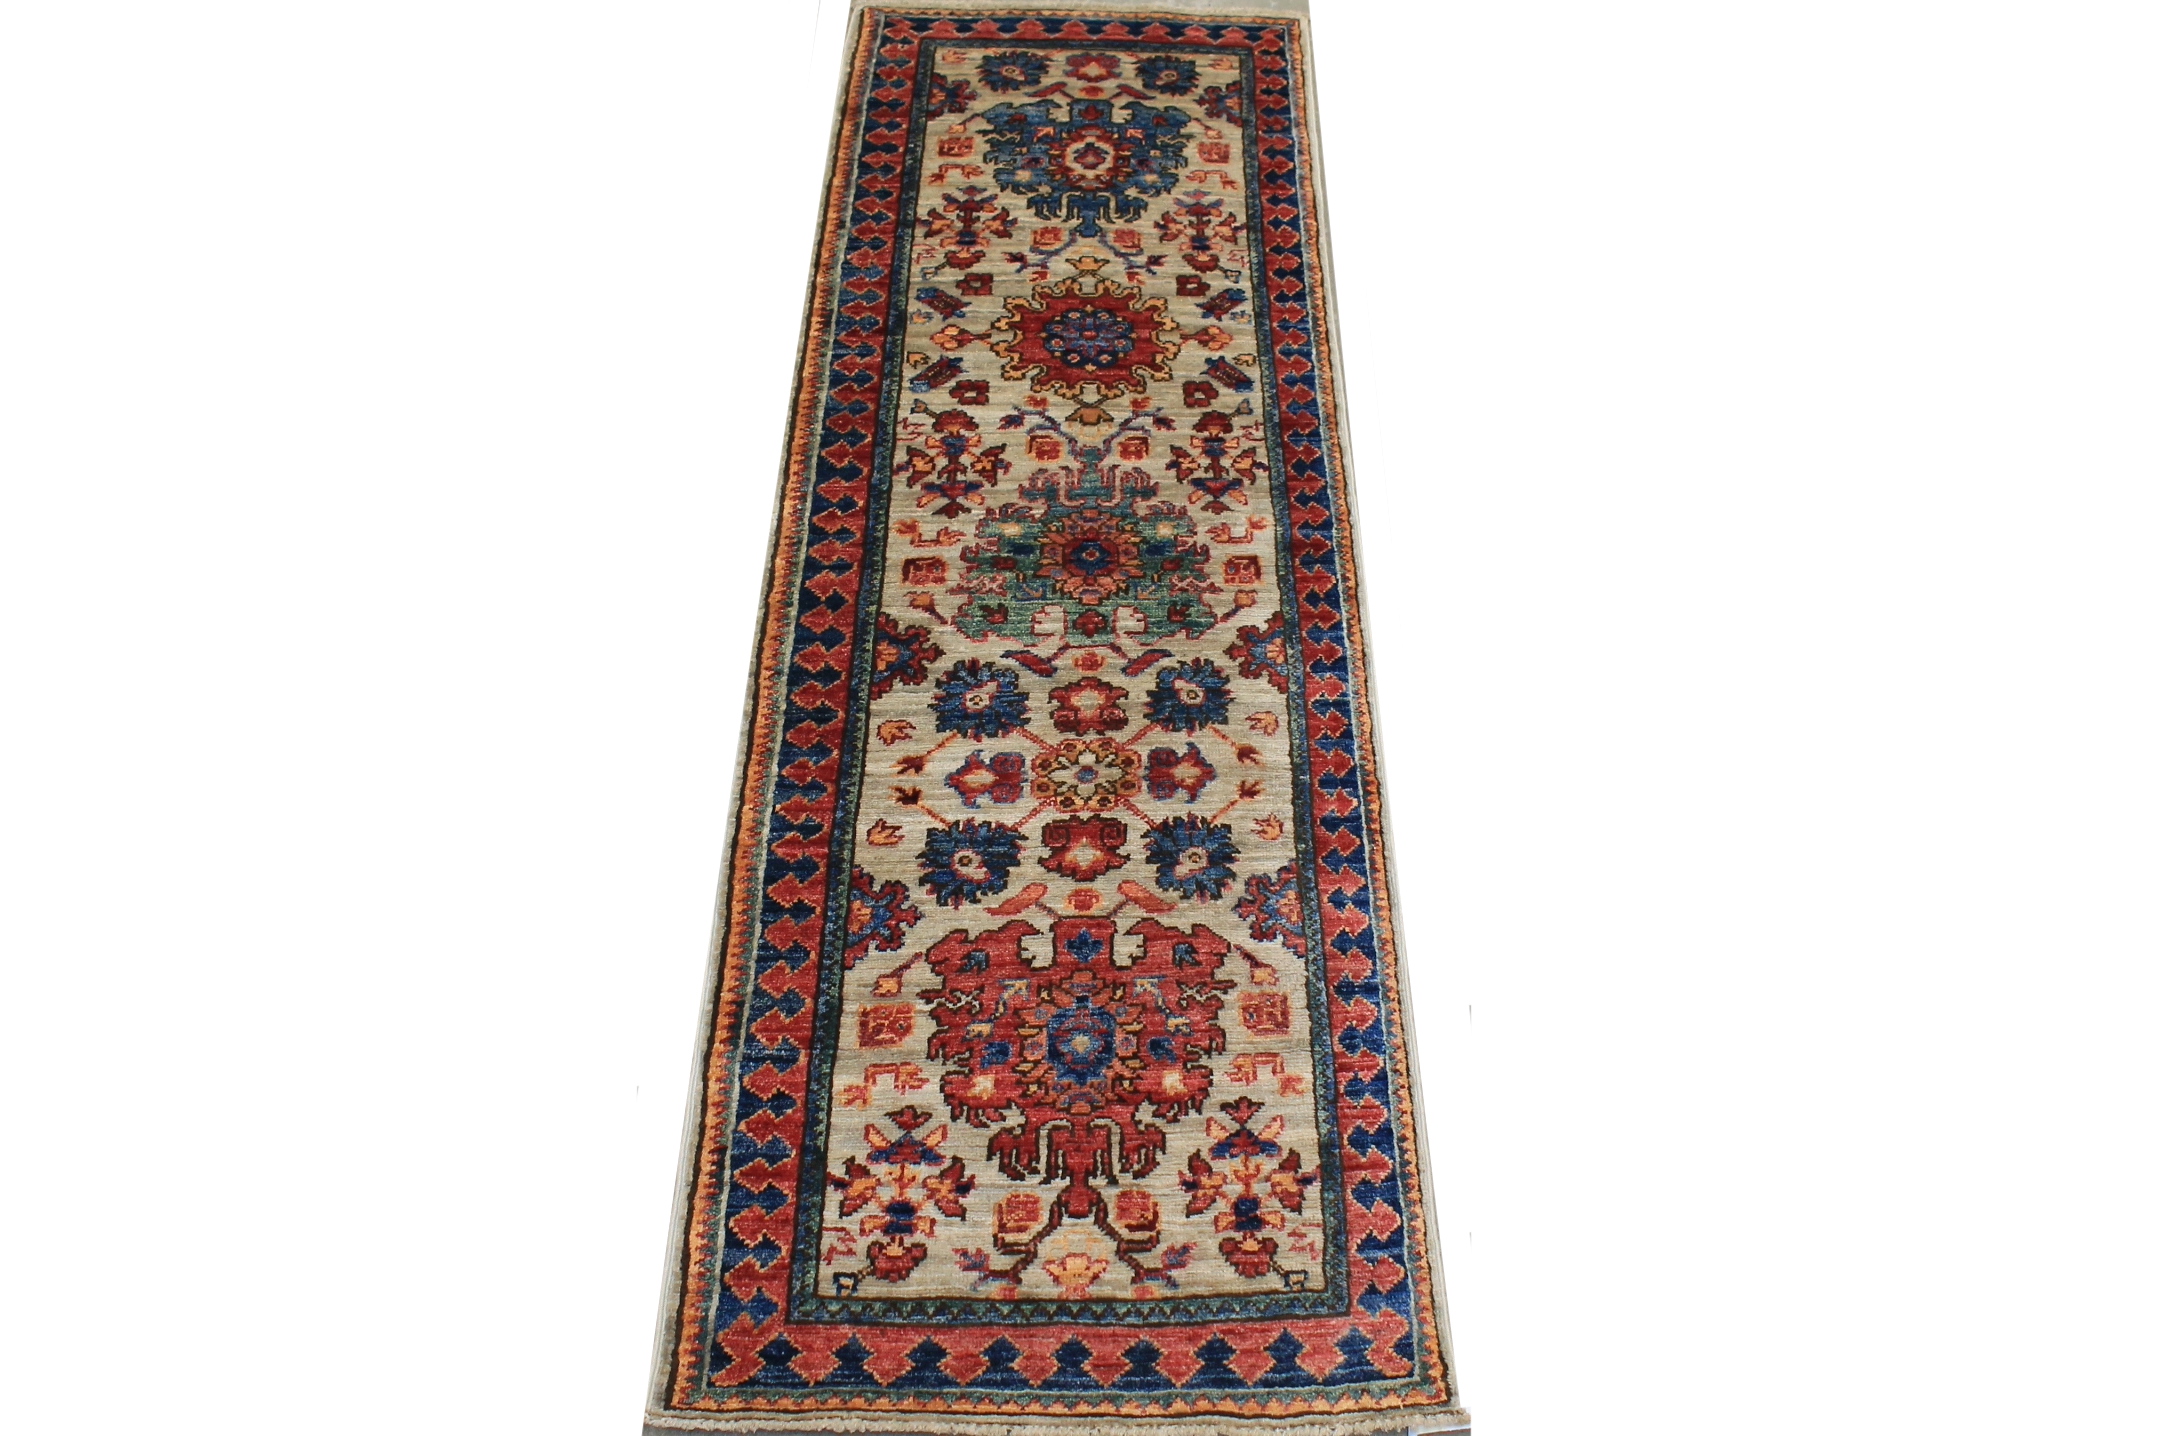 6 ft. Runner Aryana & Antique Revivals Hand Knotted Wool Area Rug - MR026049